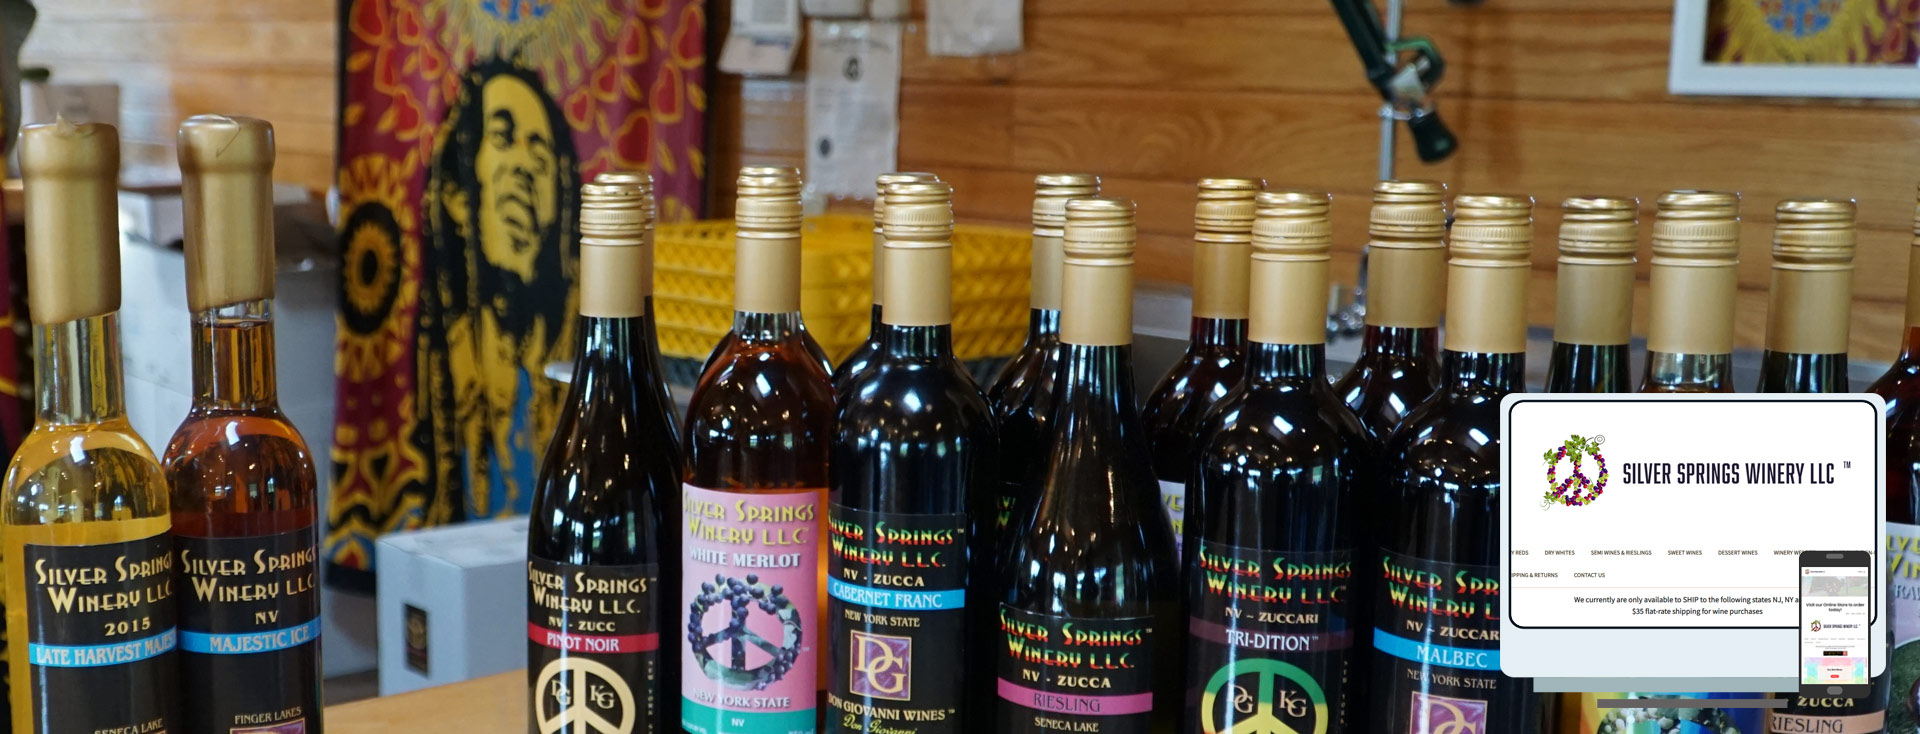 Online Store - Silver Springs Winery